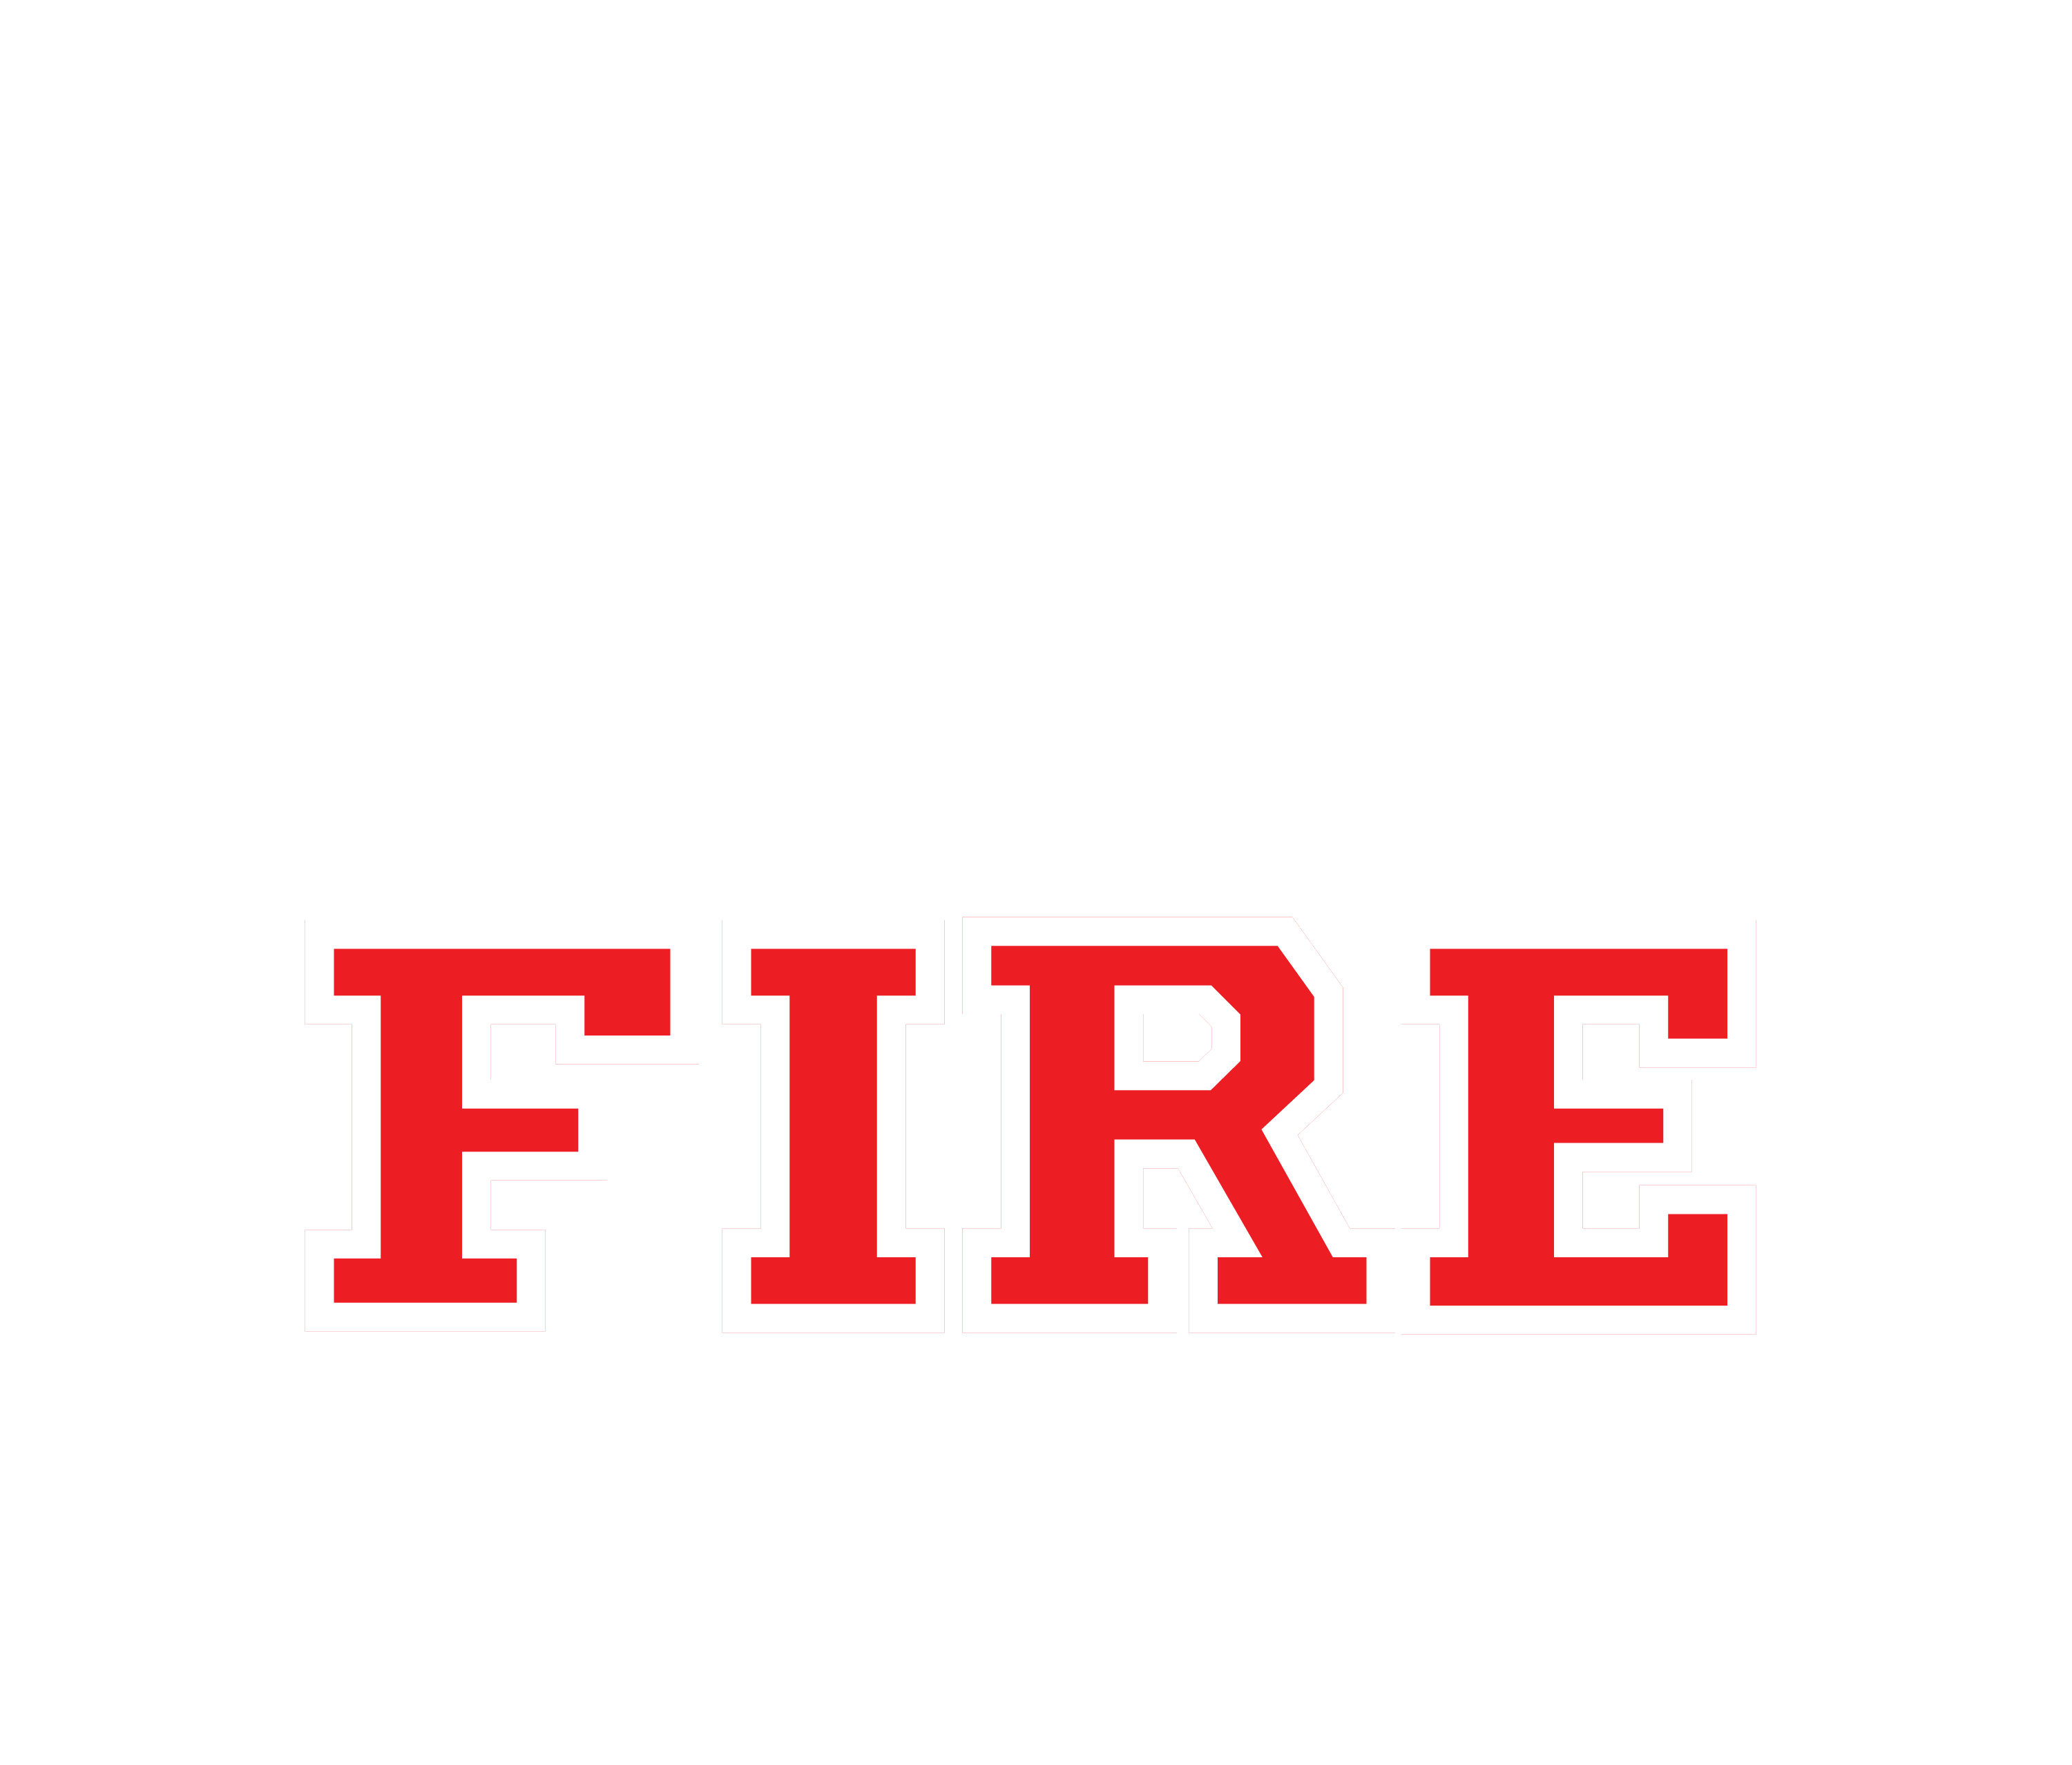 CHINO VALLEY FIRE DISTRICT